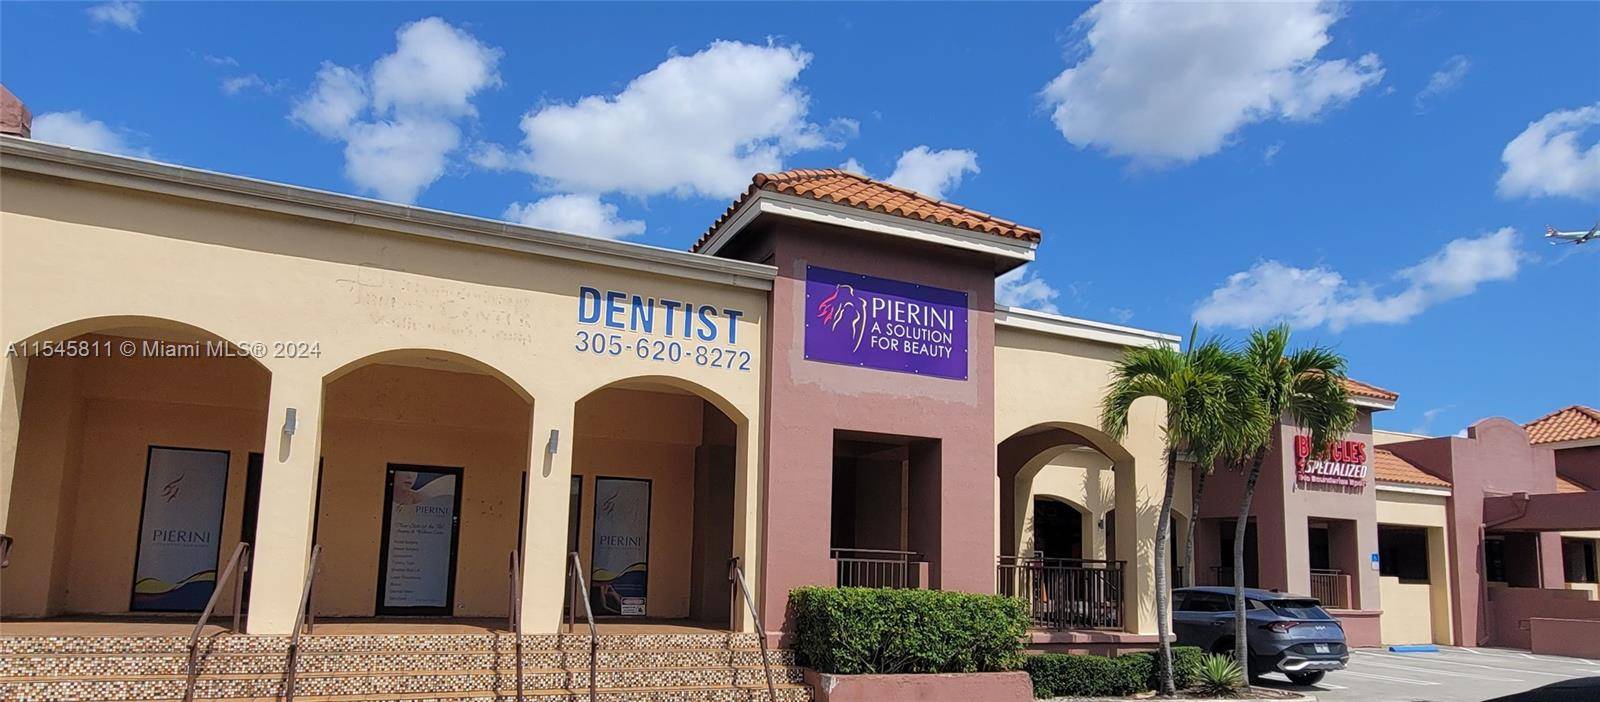 Incredible opportunity to own a cosmetic surgery center with two licensed surgery rooms, reception area, recovery room, examination room, offices, plus more all in 14, 000 sq ft of medical ...